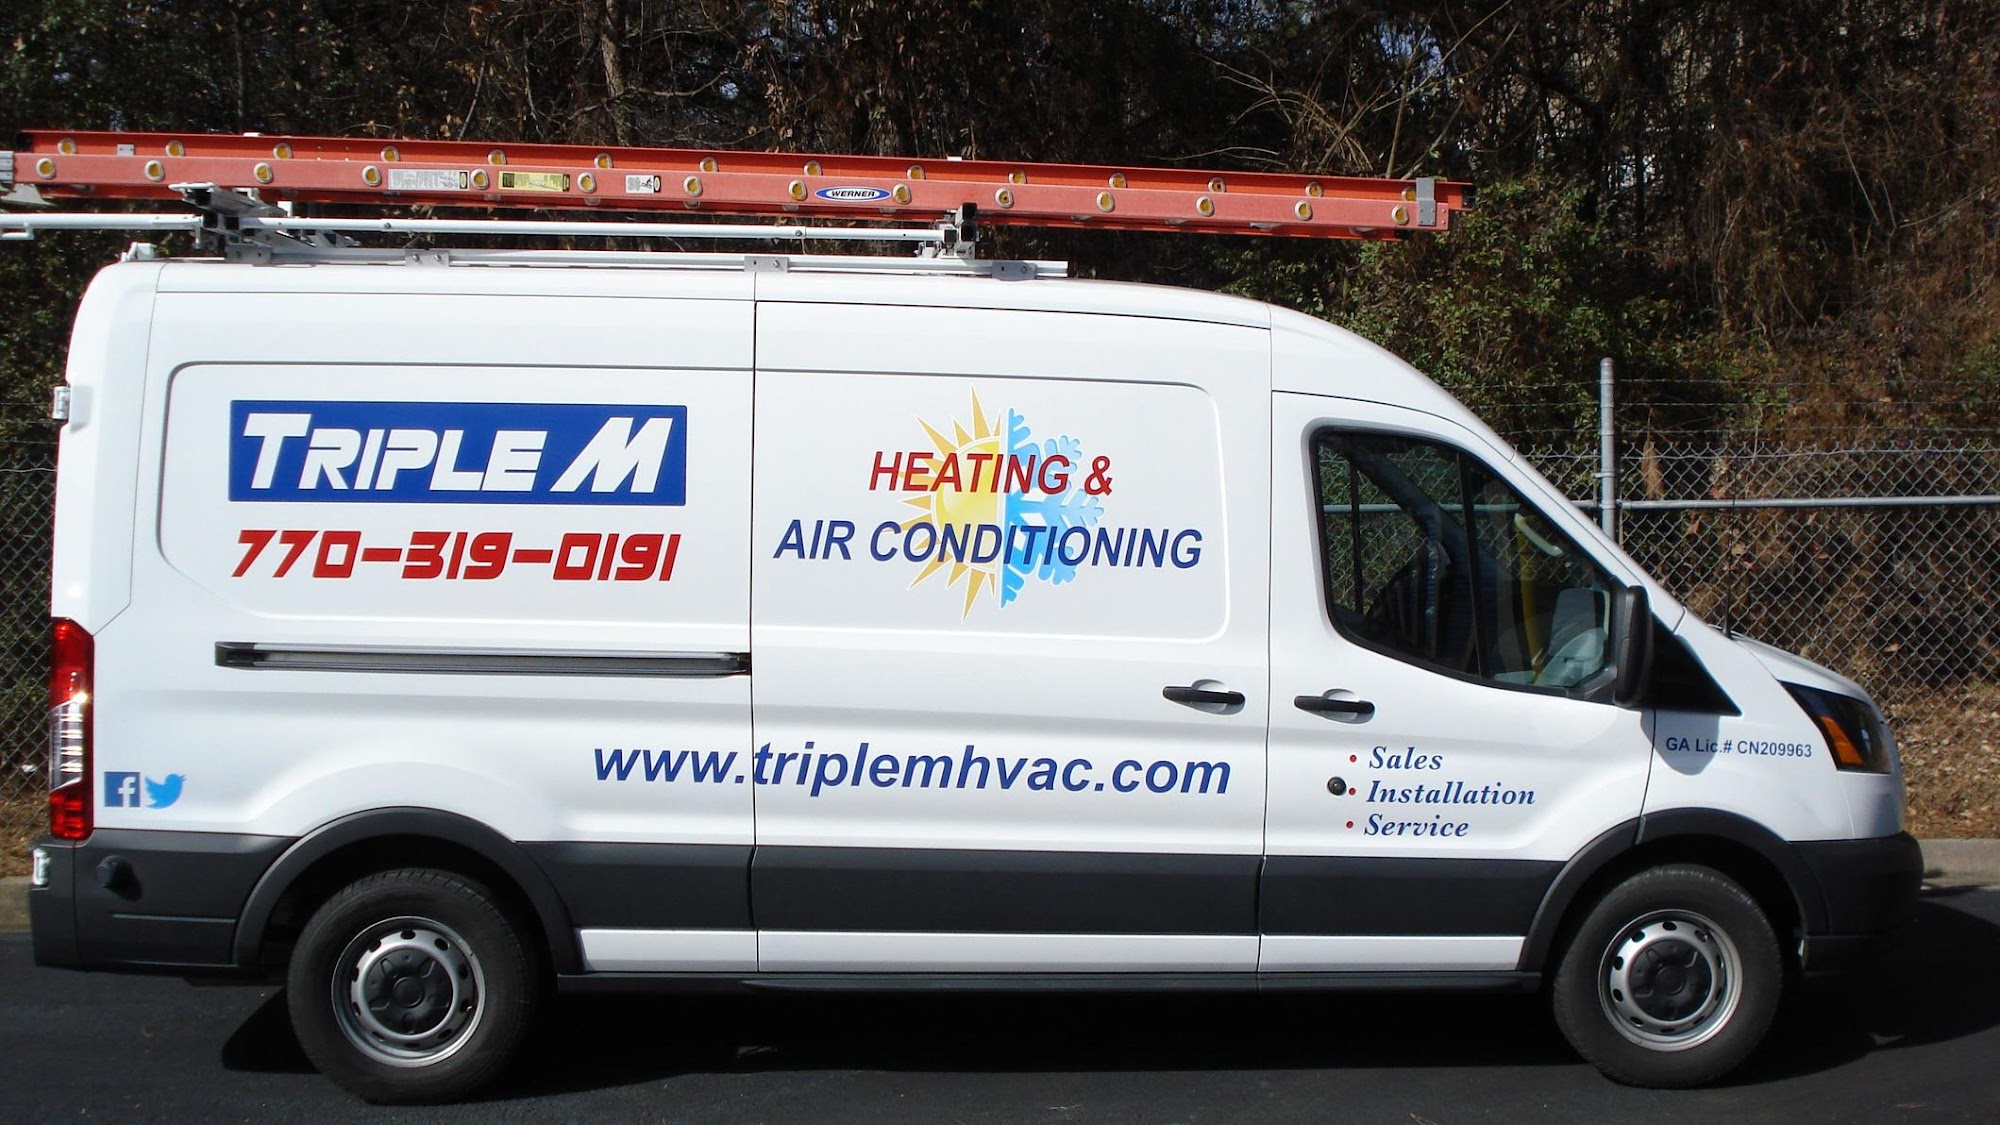 TRIPLE M HEATING & AIR CONDITIONING